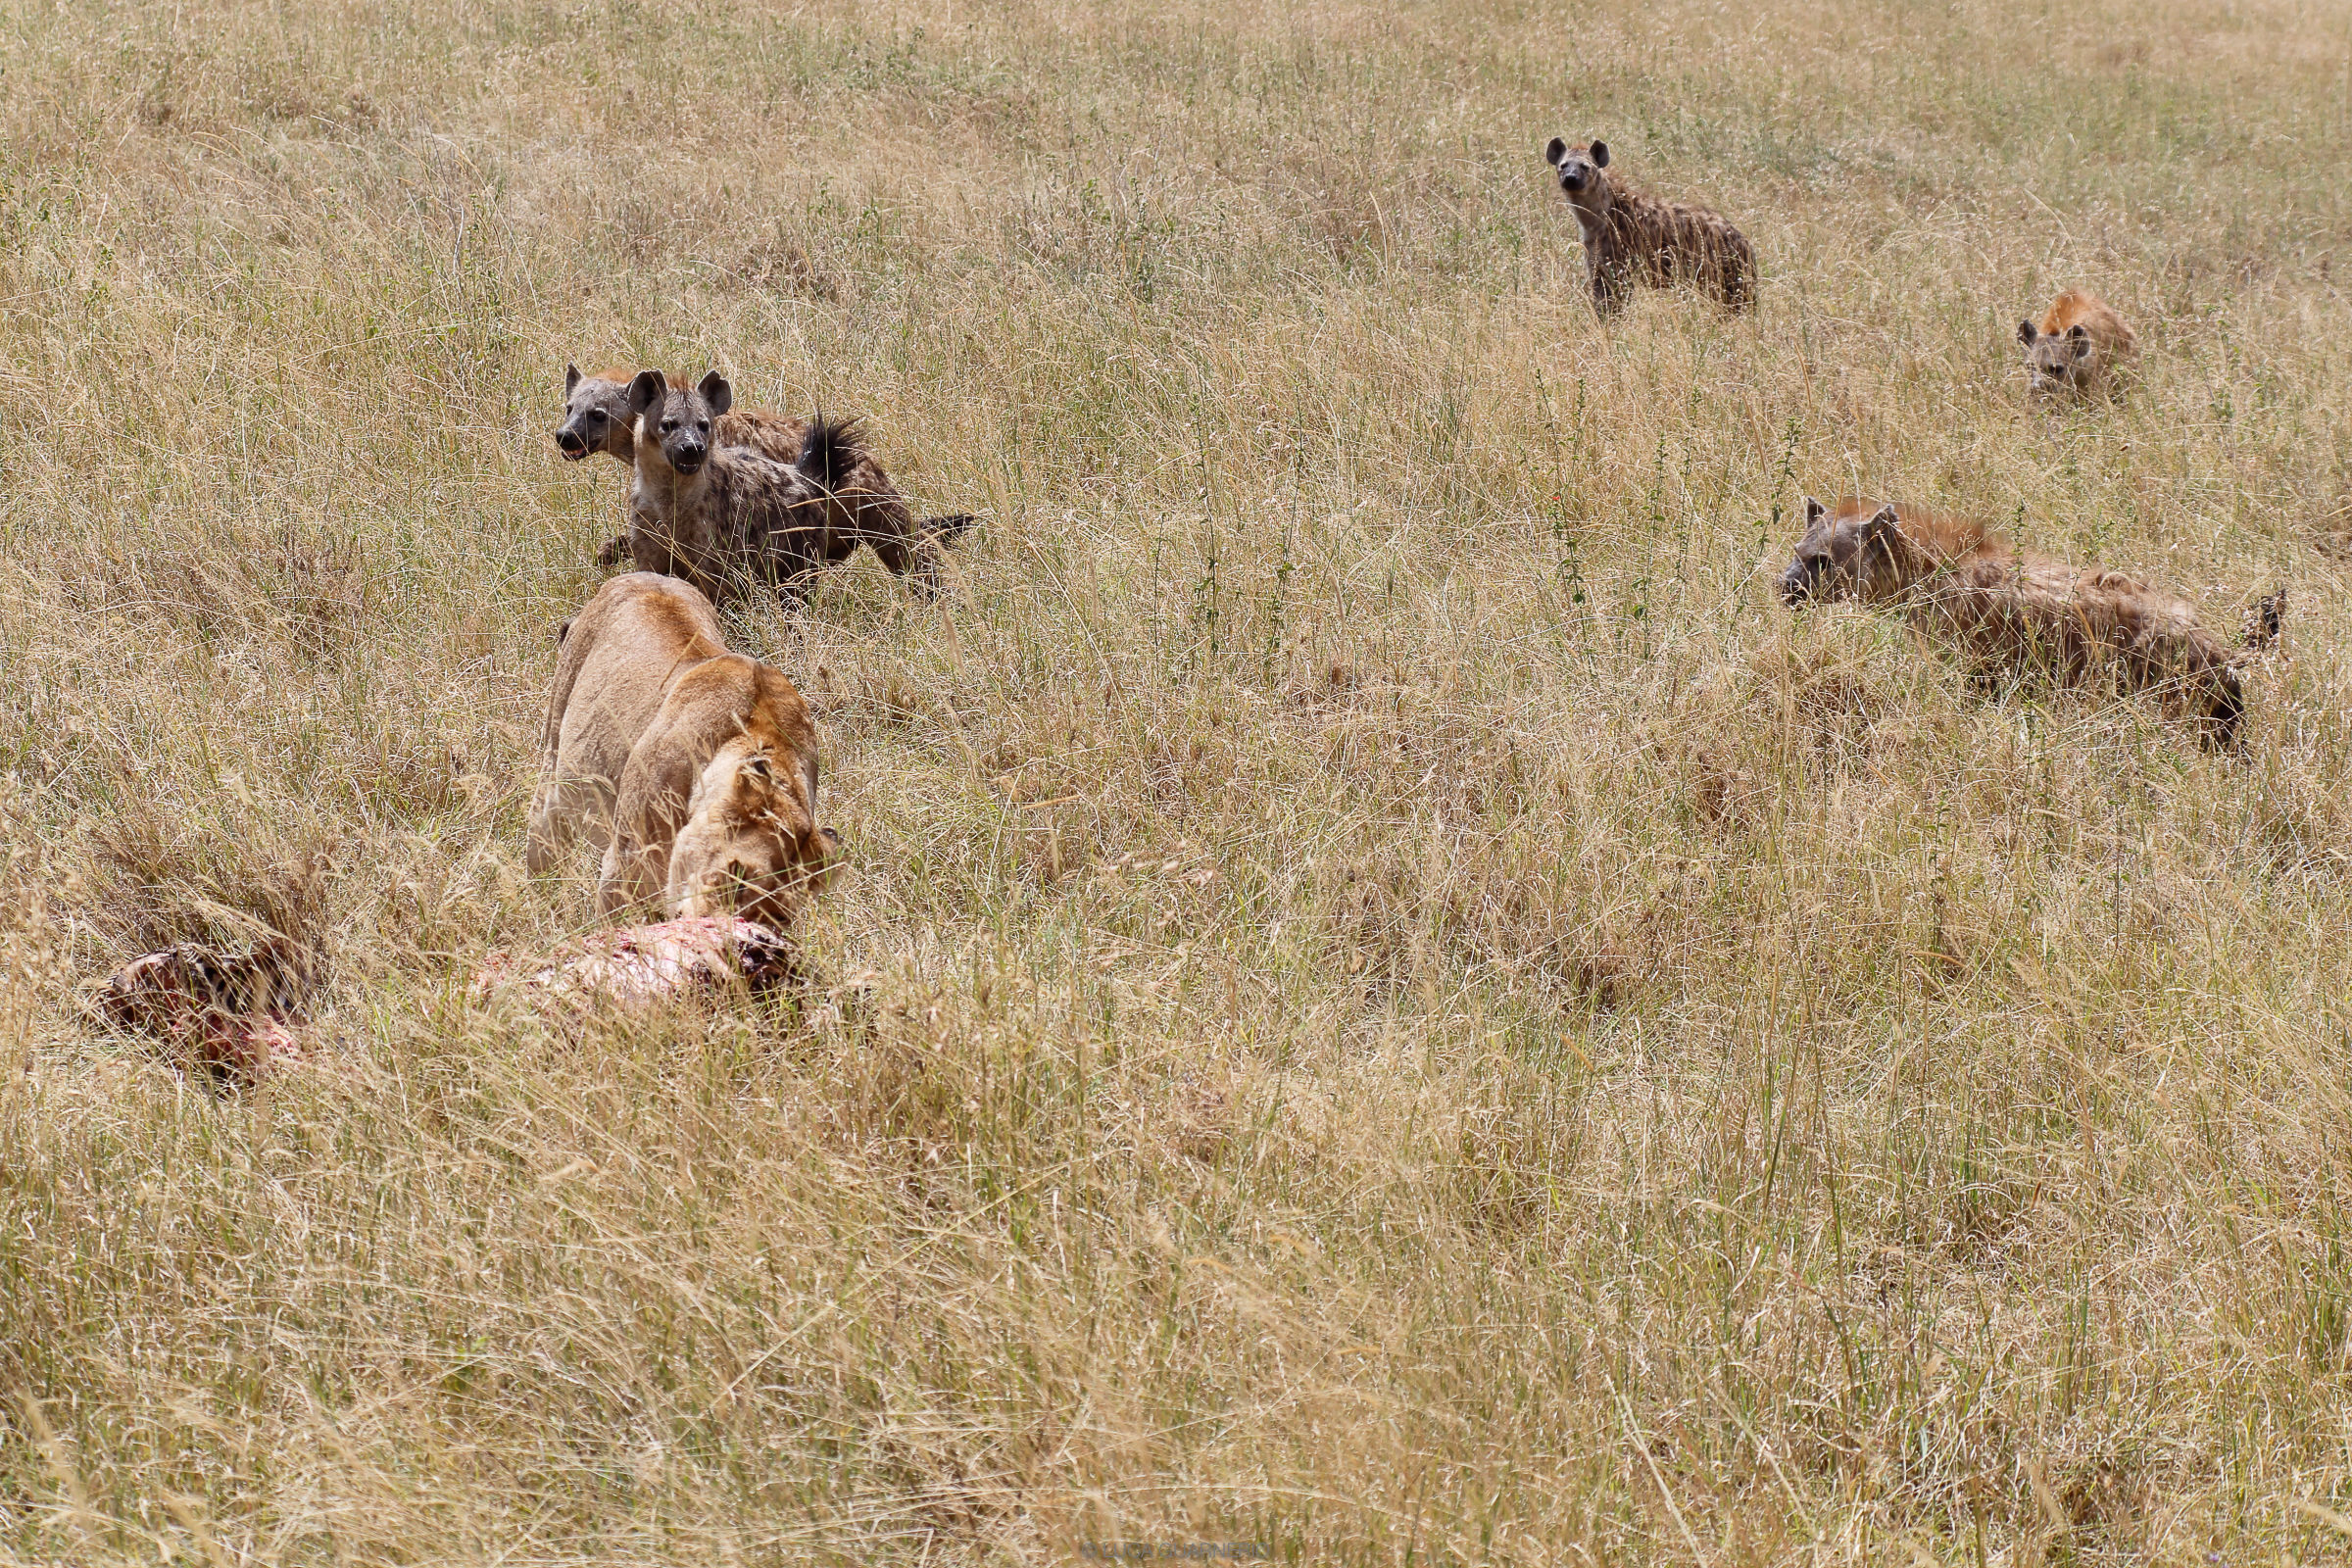 attack by hyenas...